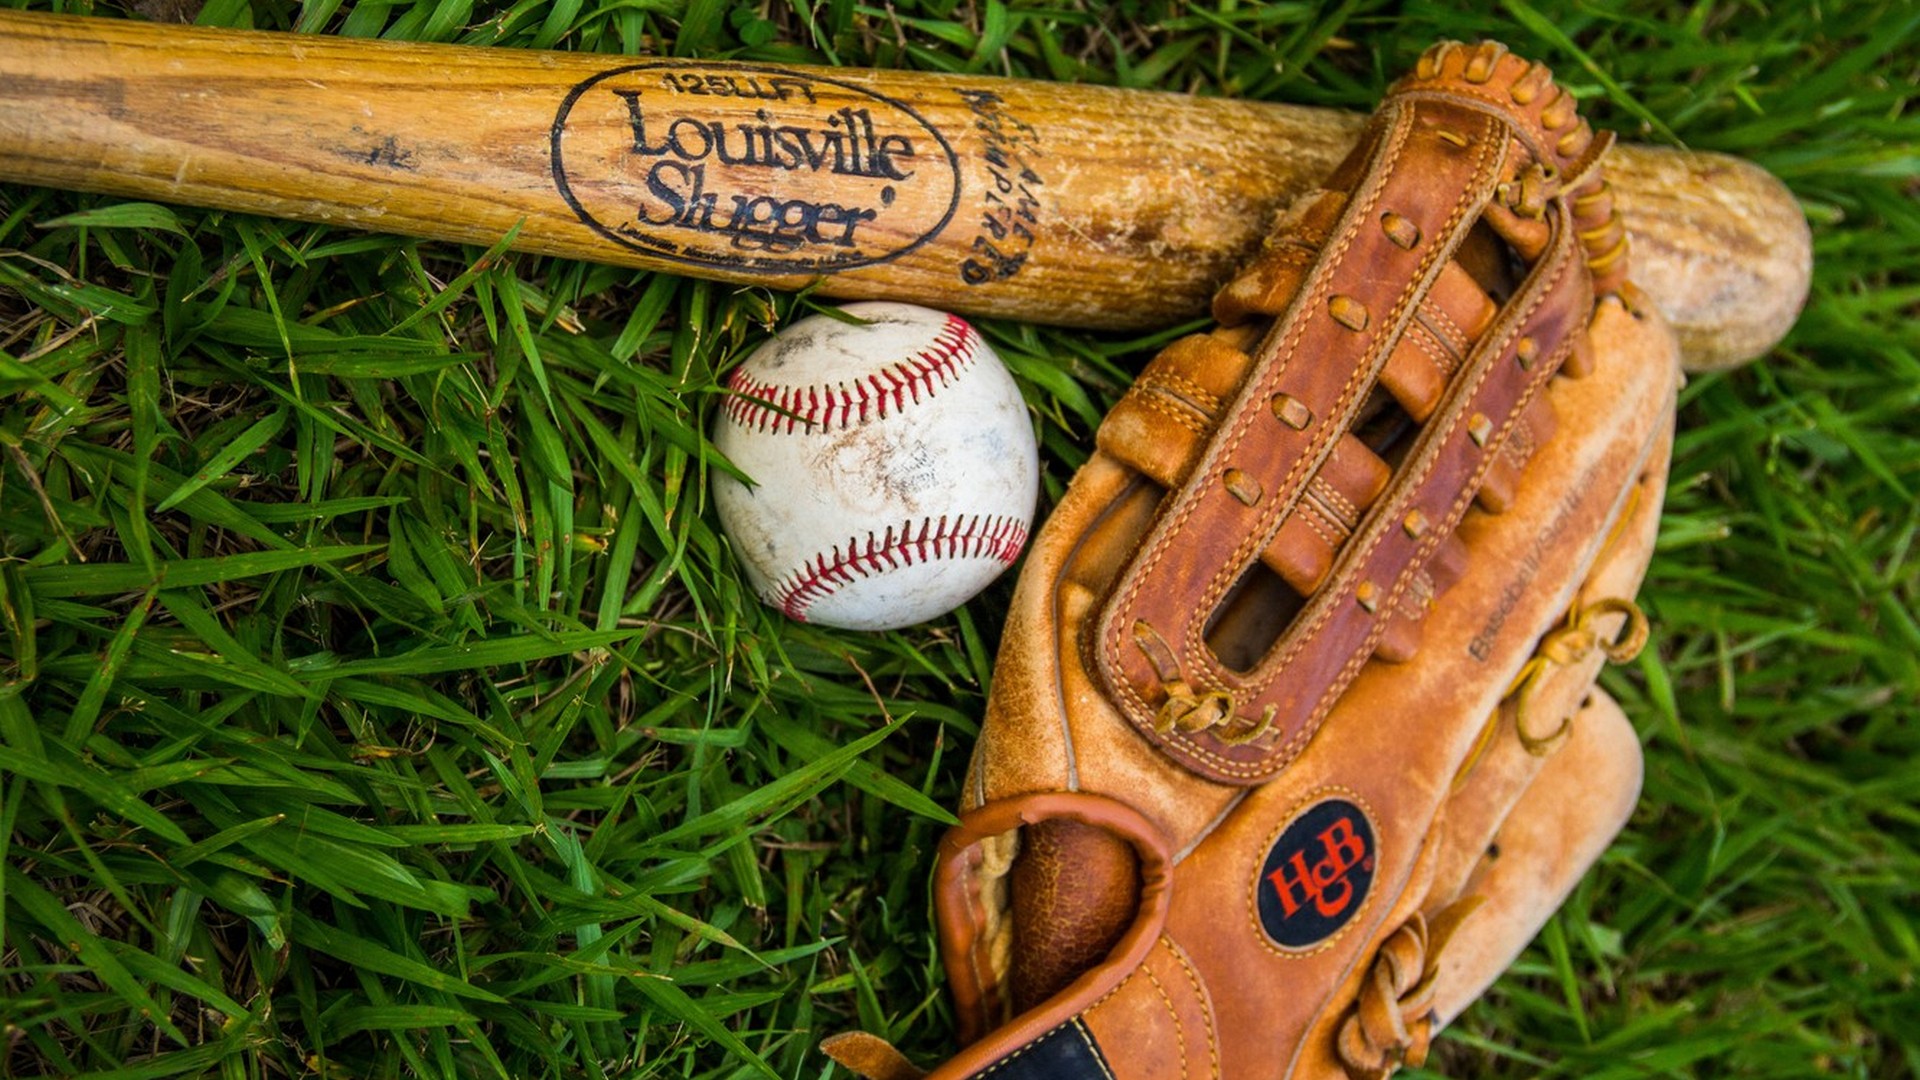 HD Backgrounds Baseball With high-resolution 1920X1080 pixel. You can use this wallpaper for Mac Desktop Wallpaper, Laptop Screensavers, Android Wallpapers, Tablet or iPhone Home Screen and another mobile phone device